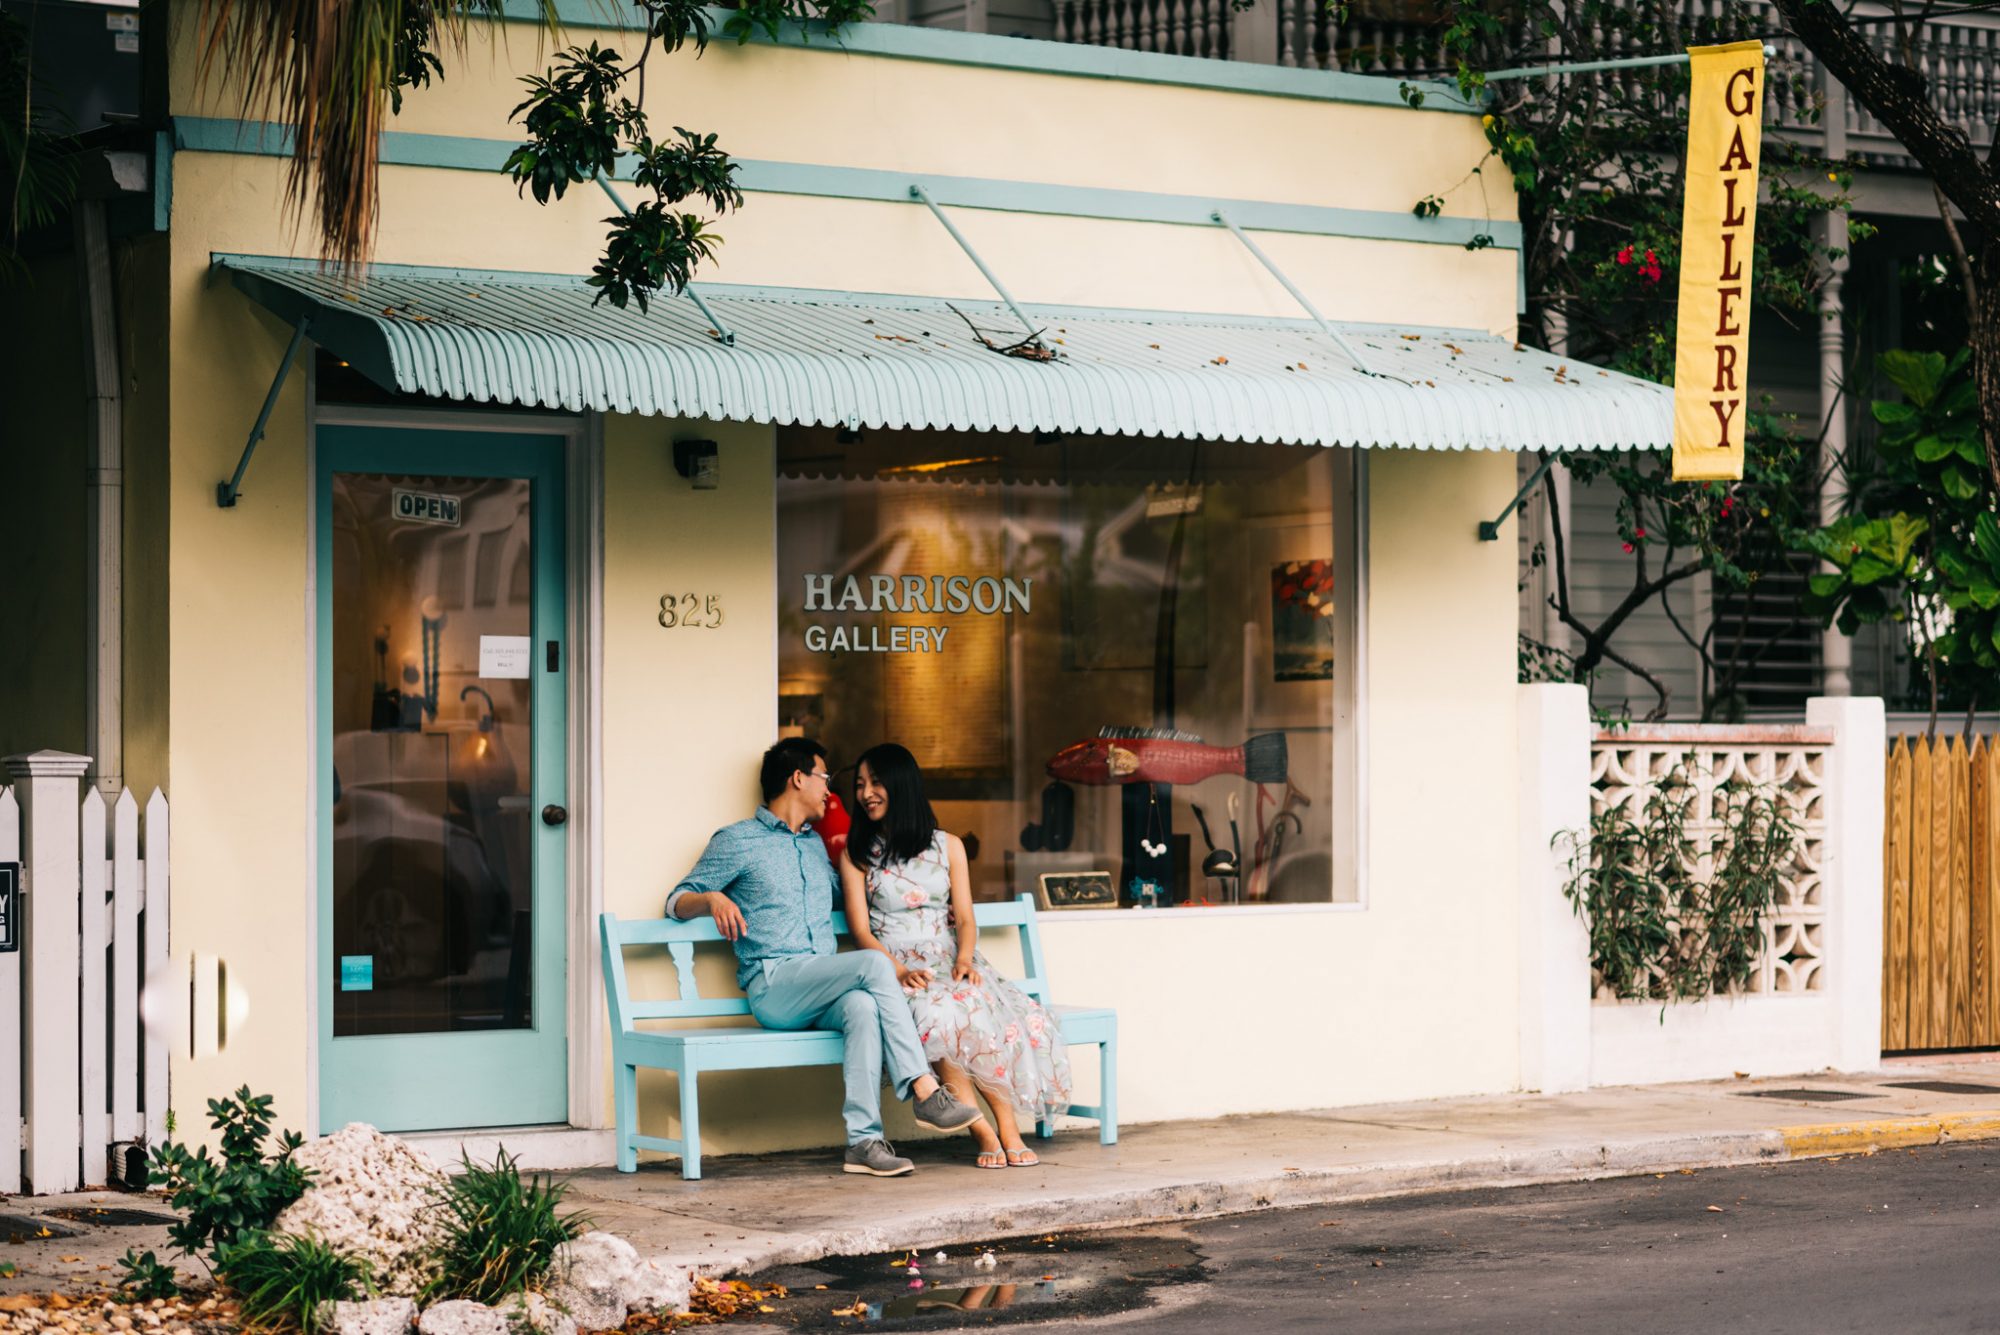 Xiao and Ying's sunset engagement session in Key West, FL captured them sitting on a bench in front of a store.